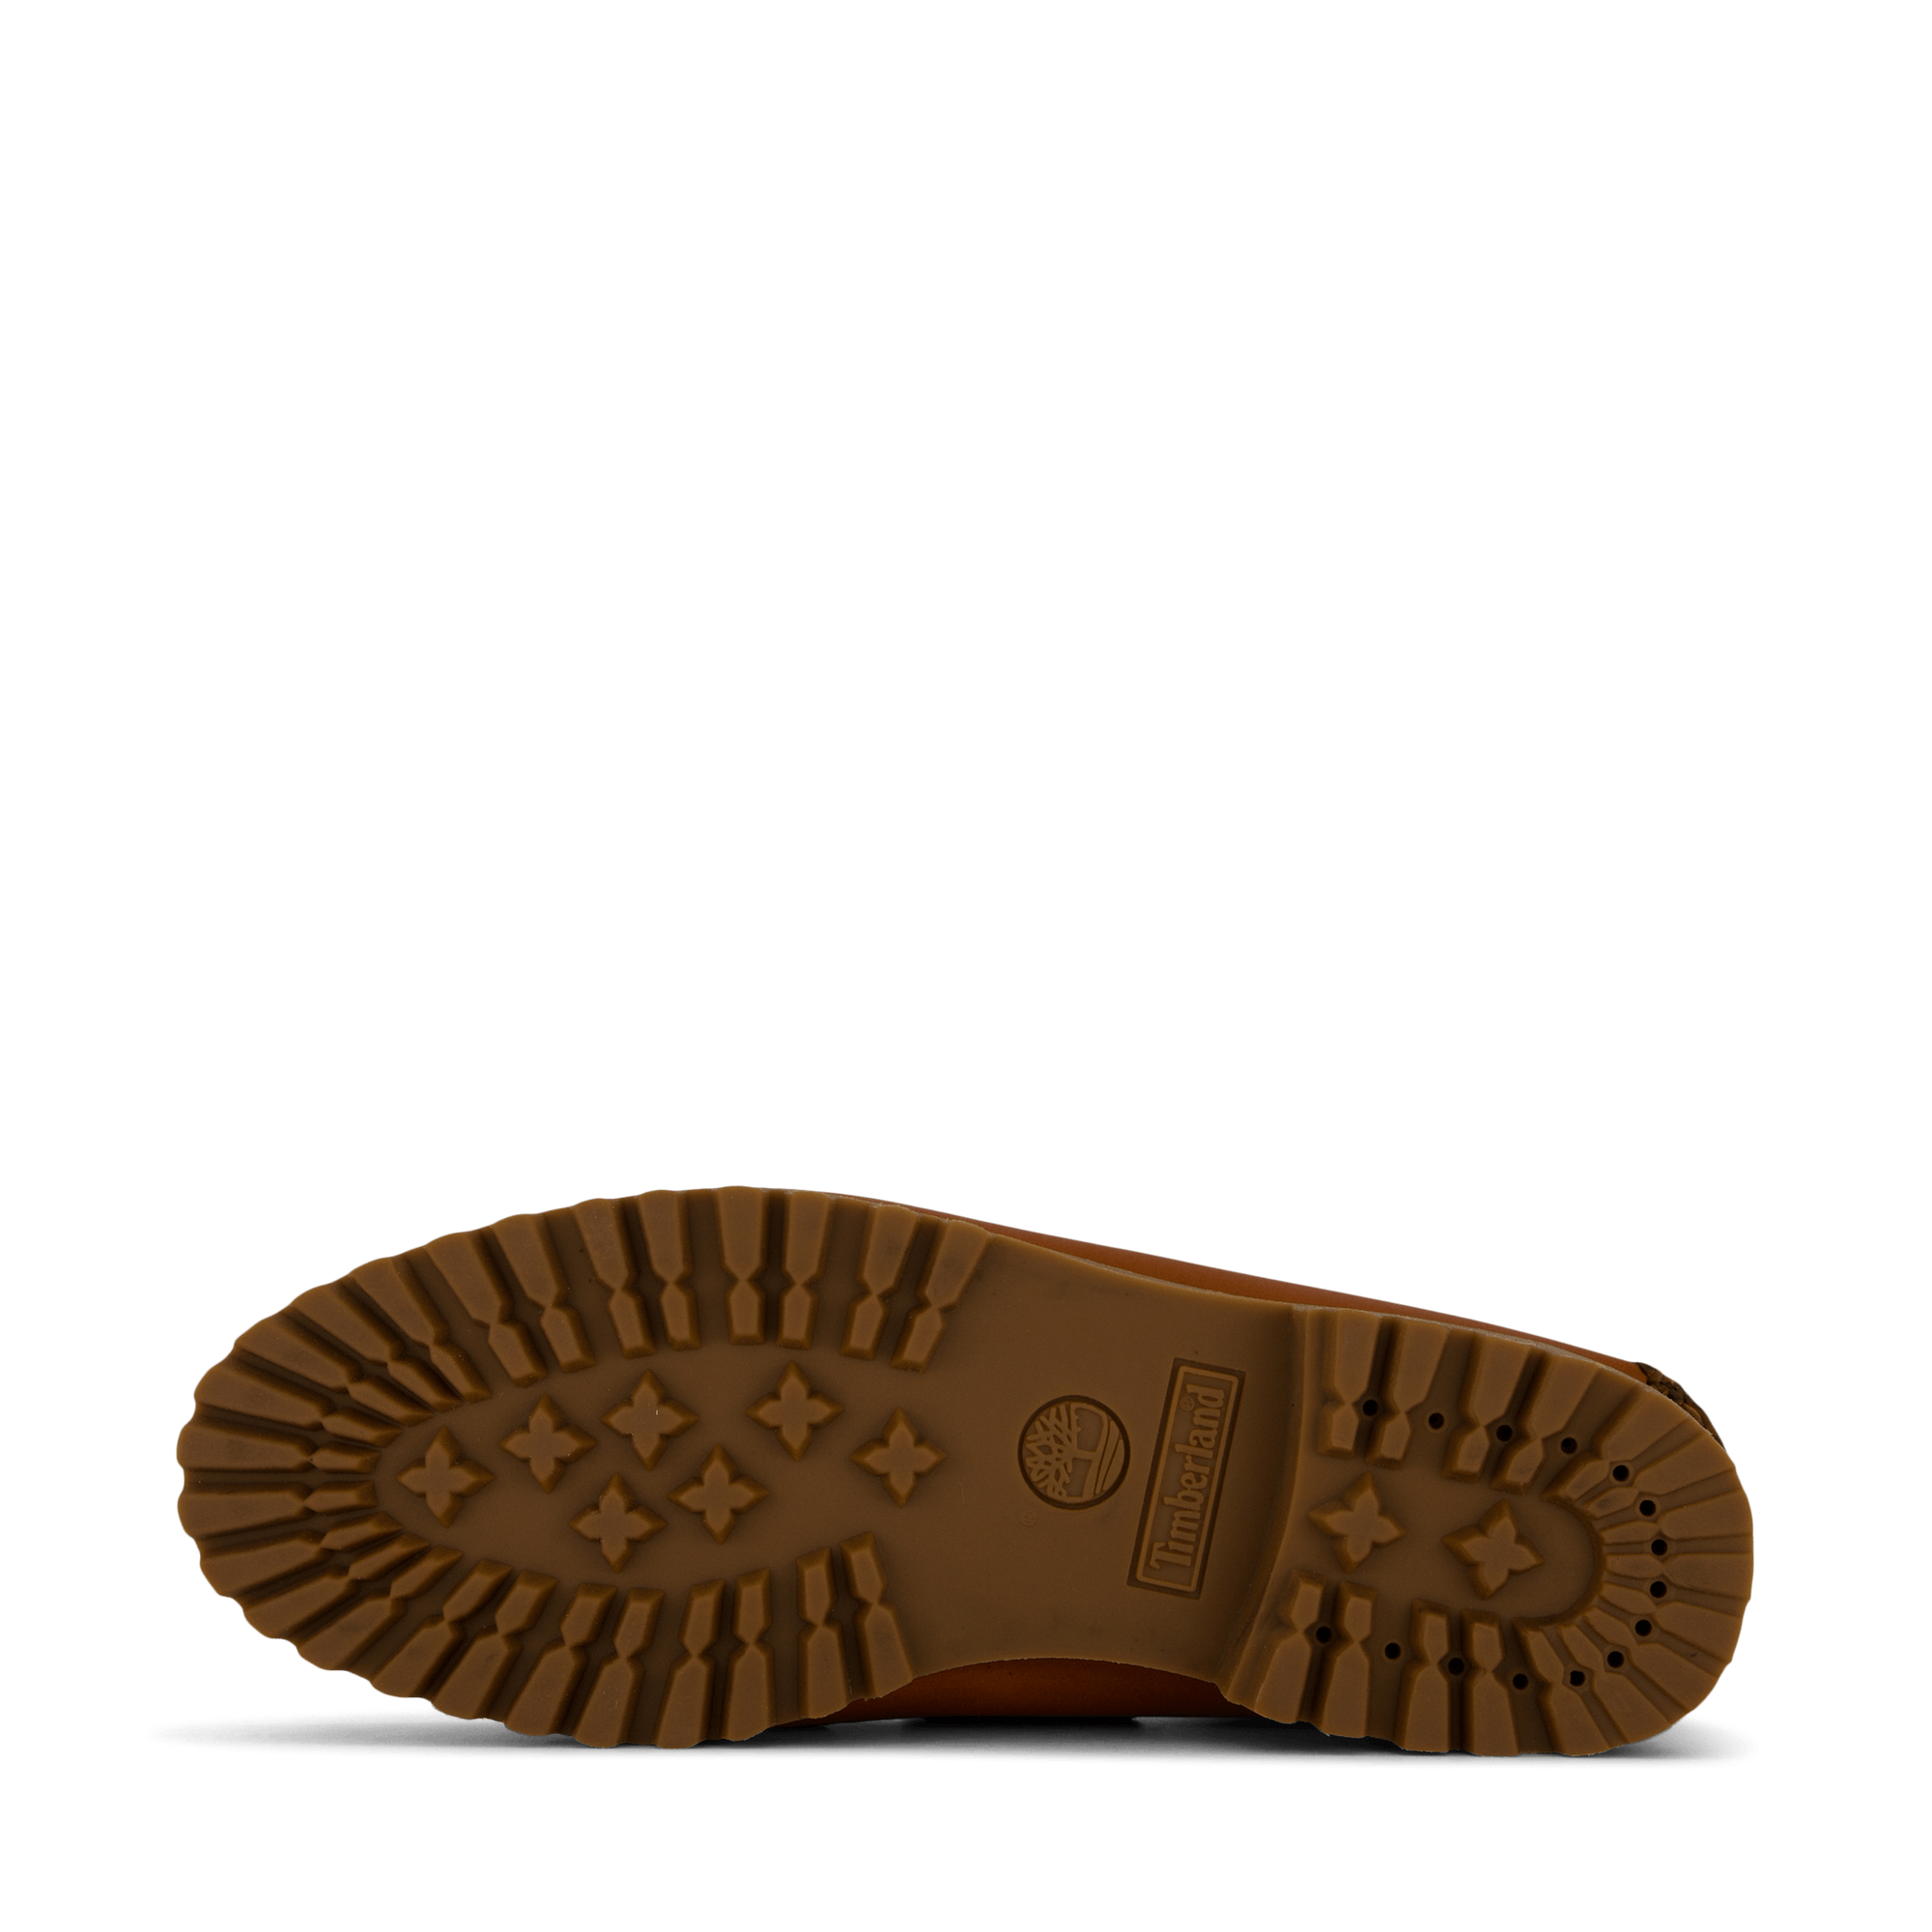 Auth Boat Shoe Mid Brown